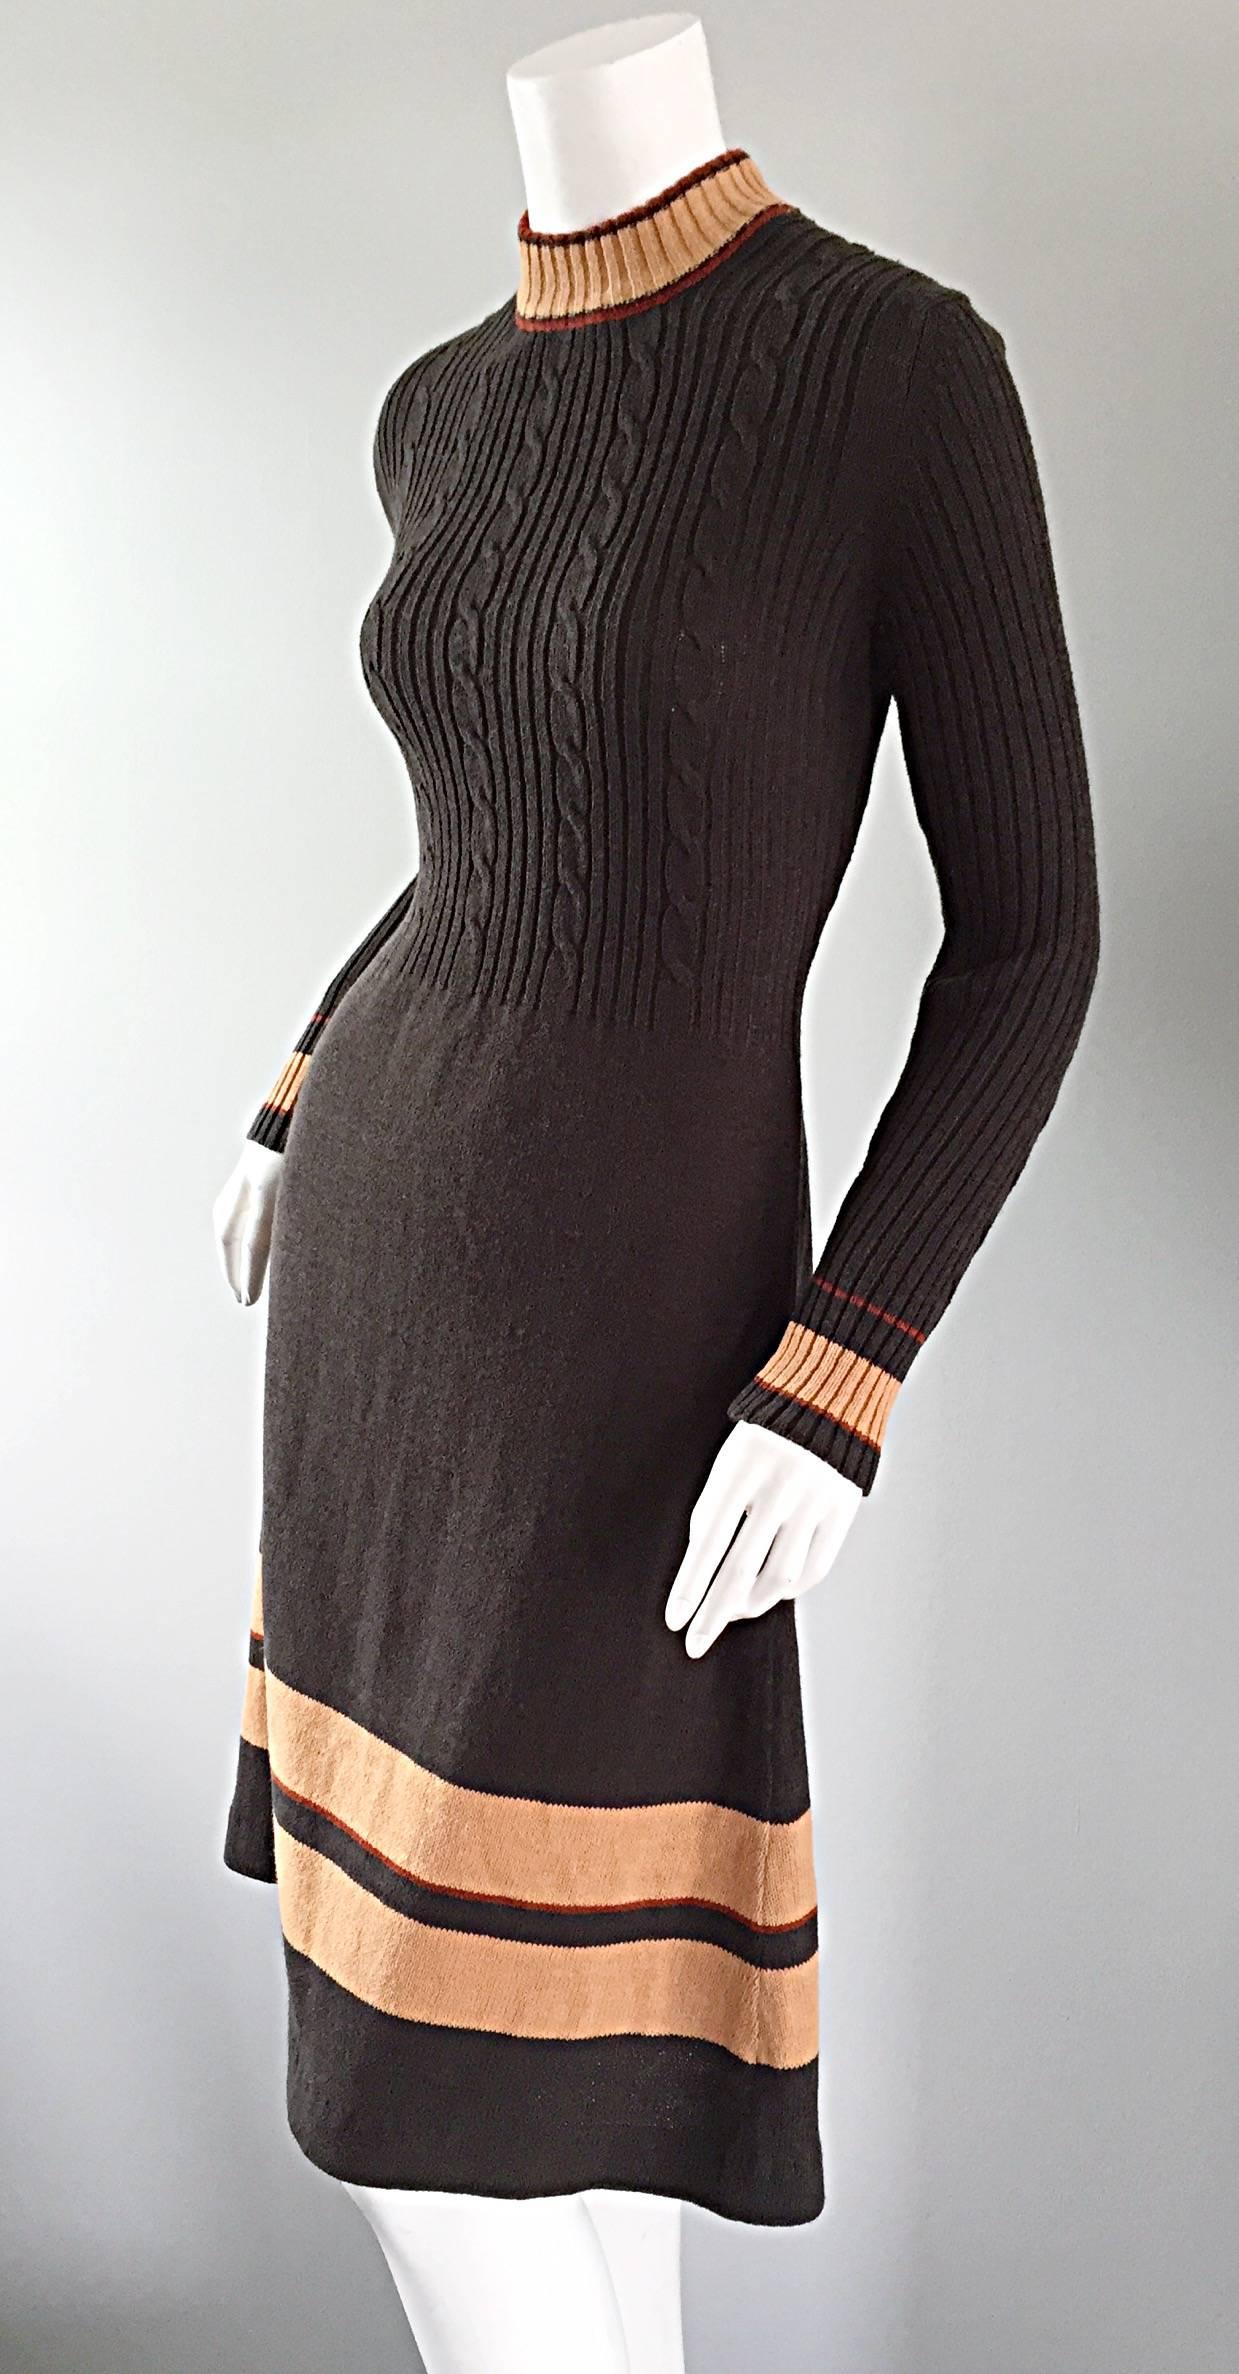 Chic 1960s 60s Judy Wayne Chocolate Brown Mod Vintage Sweater Dress In Excellent Condition For Sale In San Diego, CA